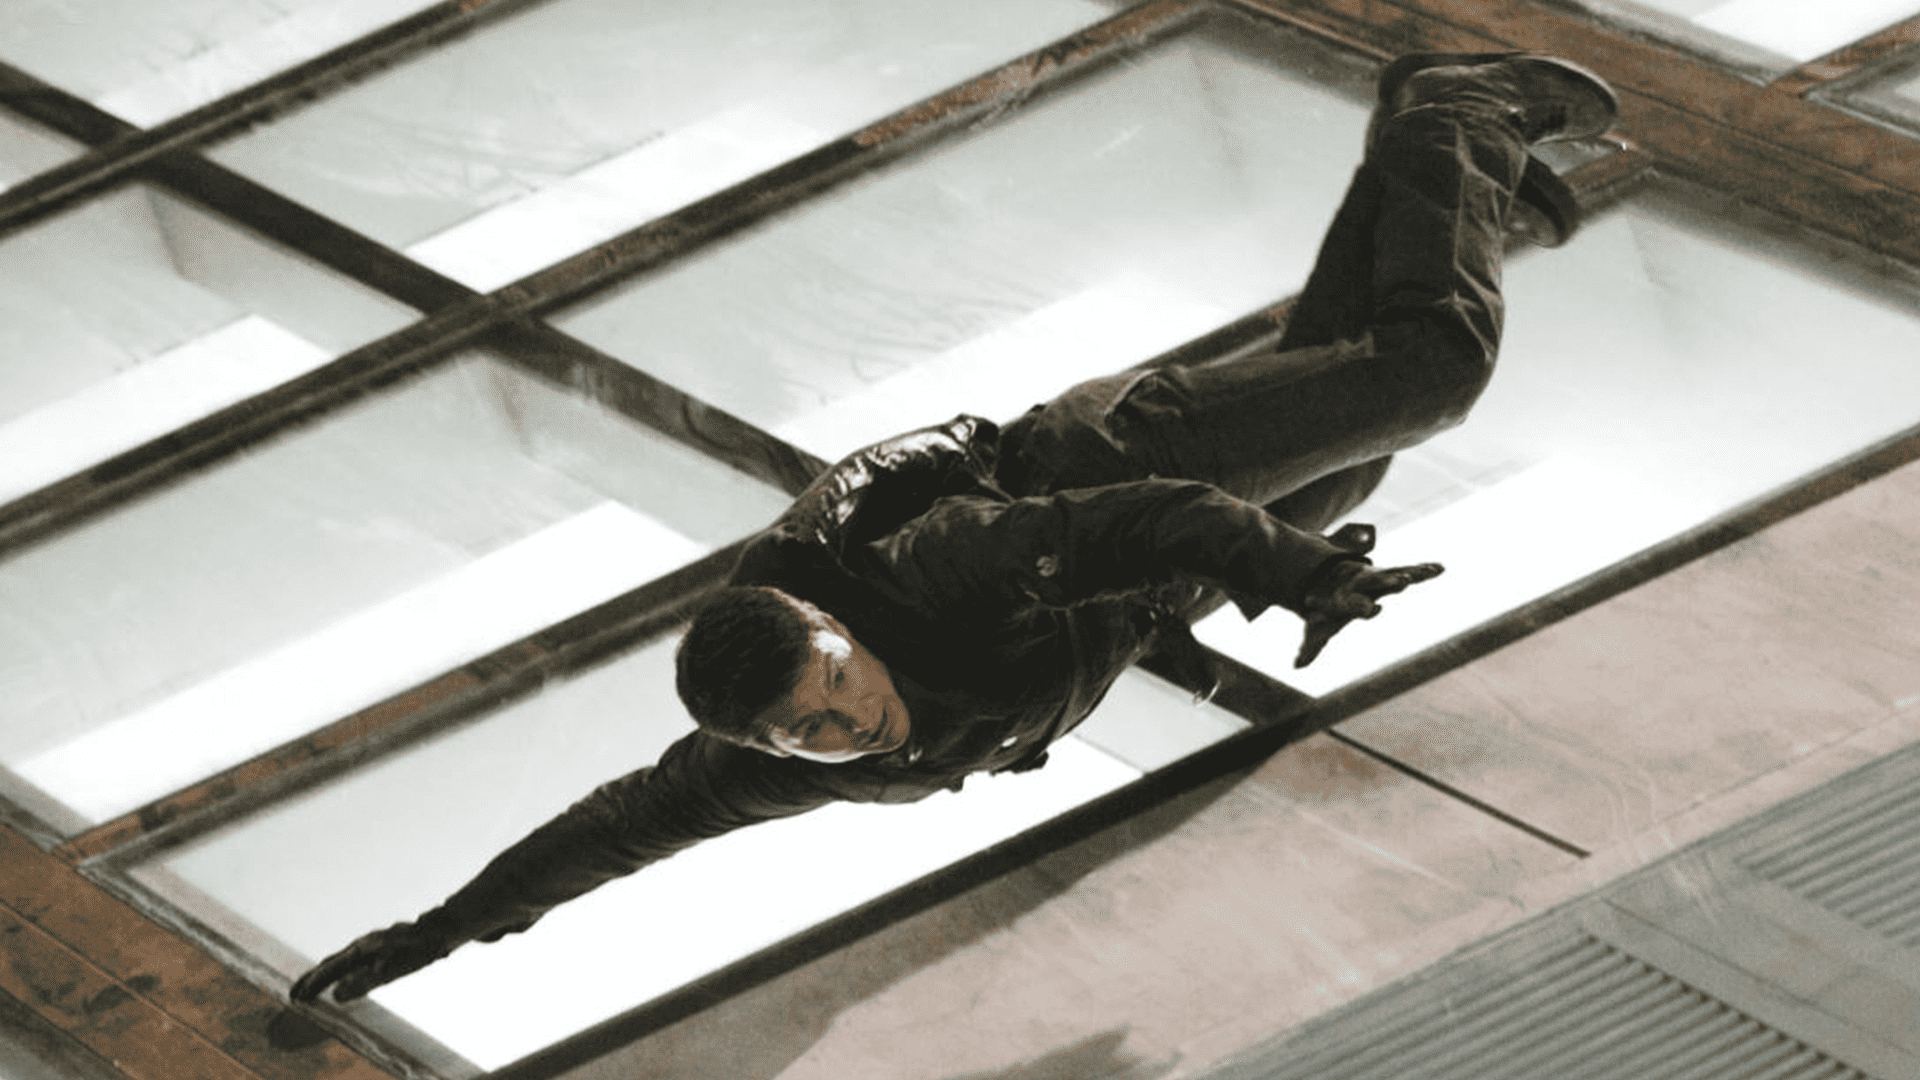 Tom Cruise slides down the slanted rooftop of a skyscraper in this image from Paramount Pictures.